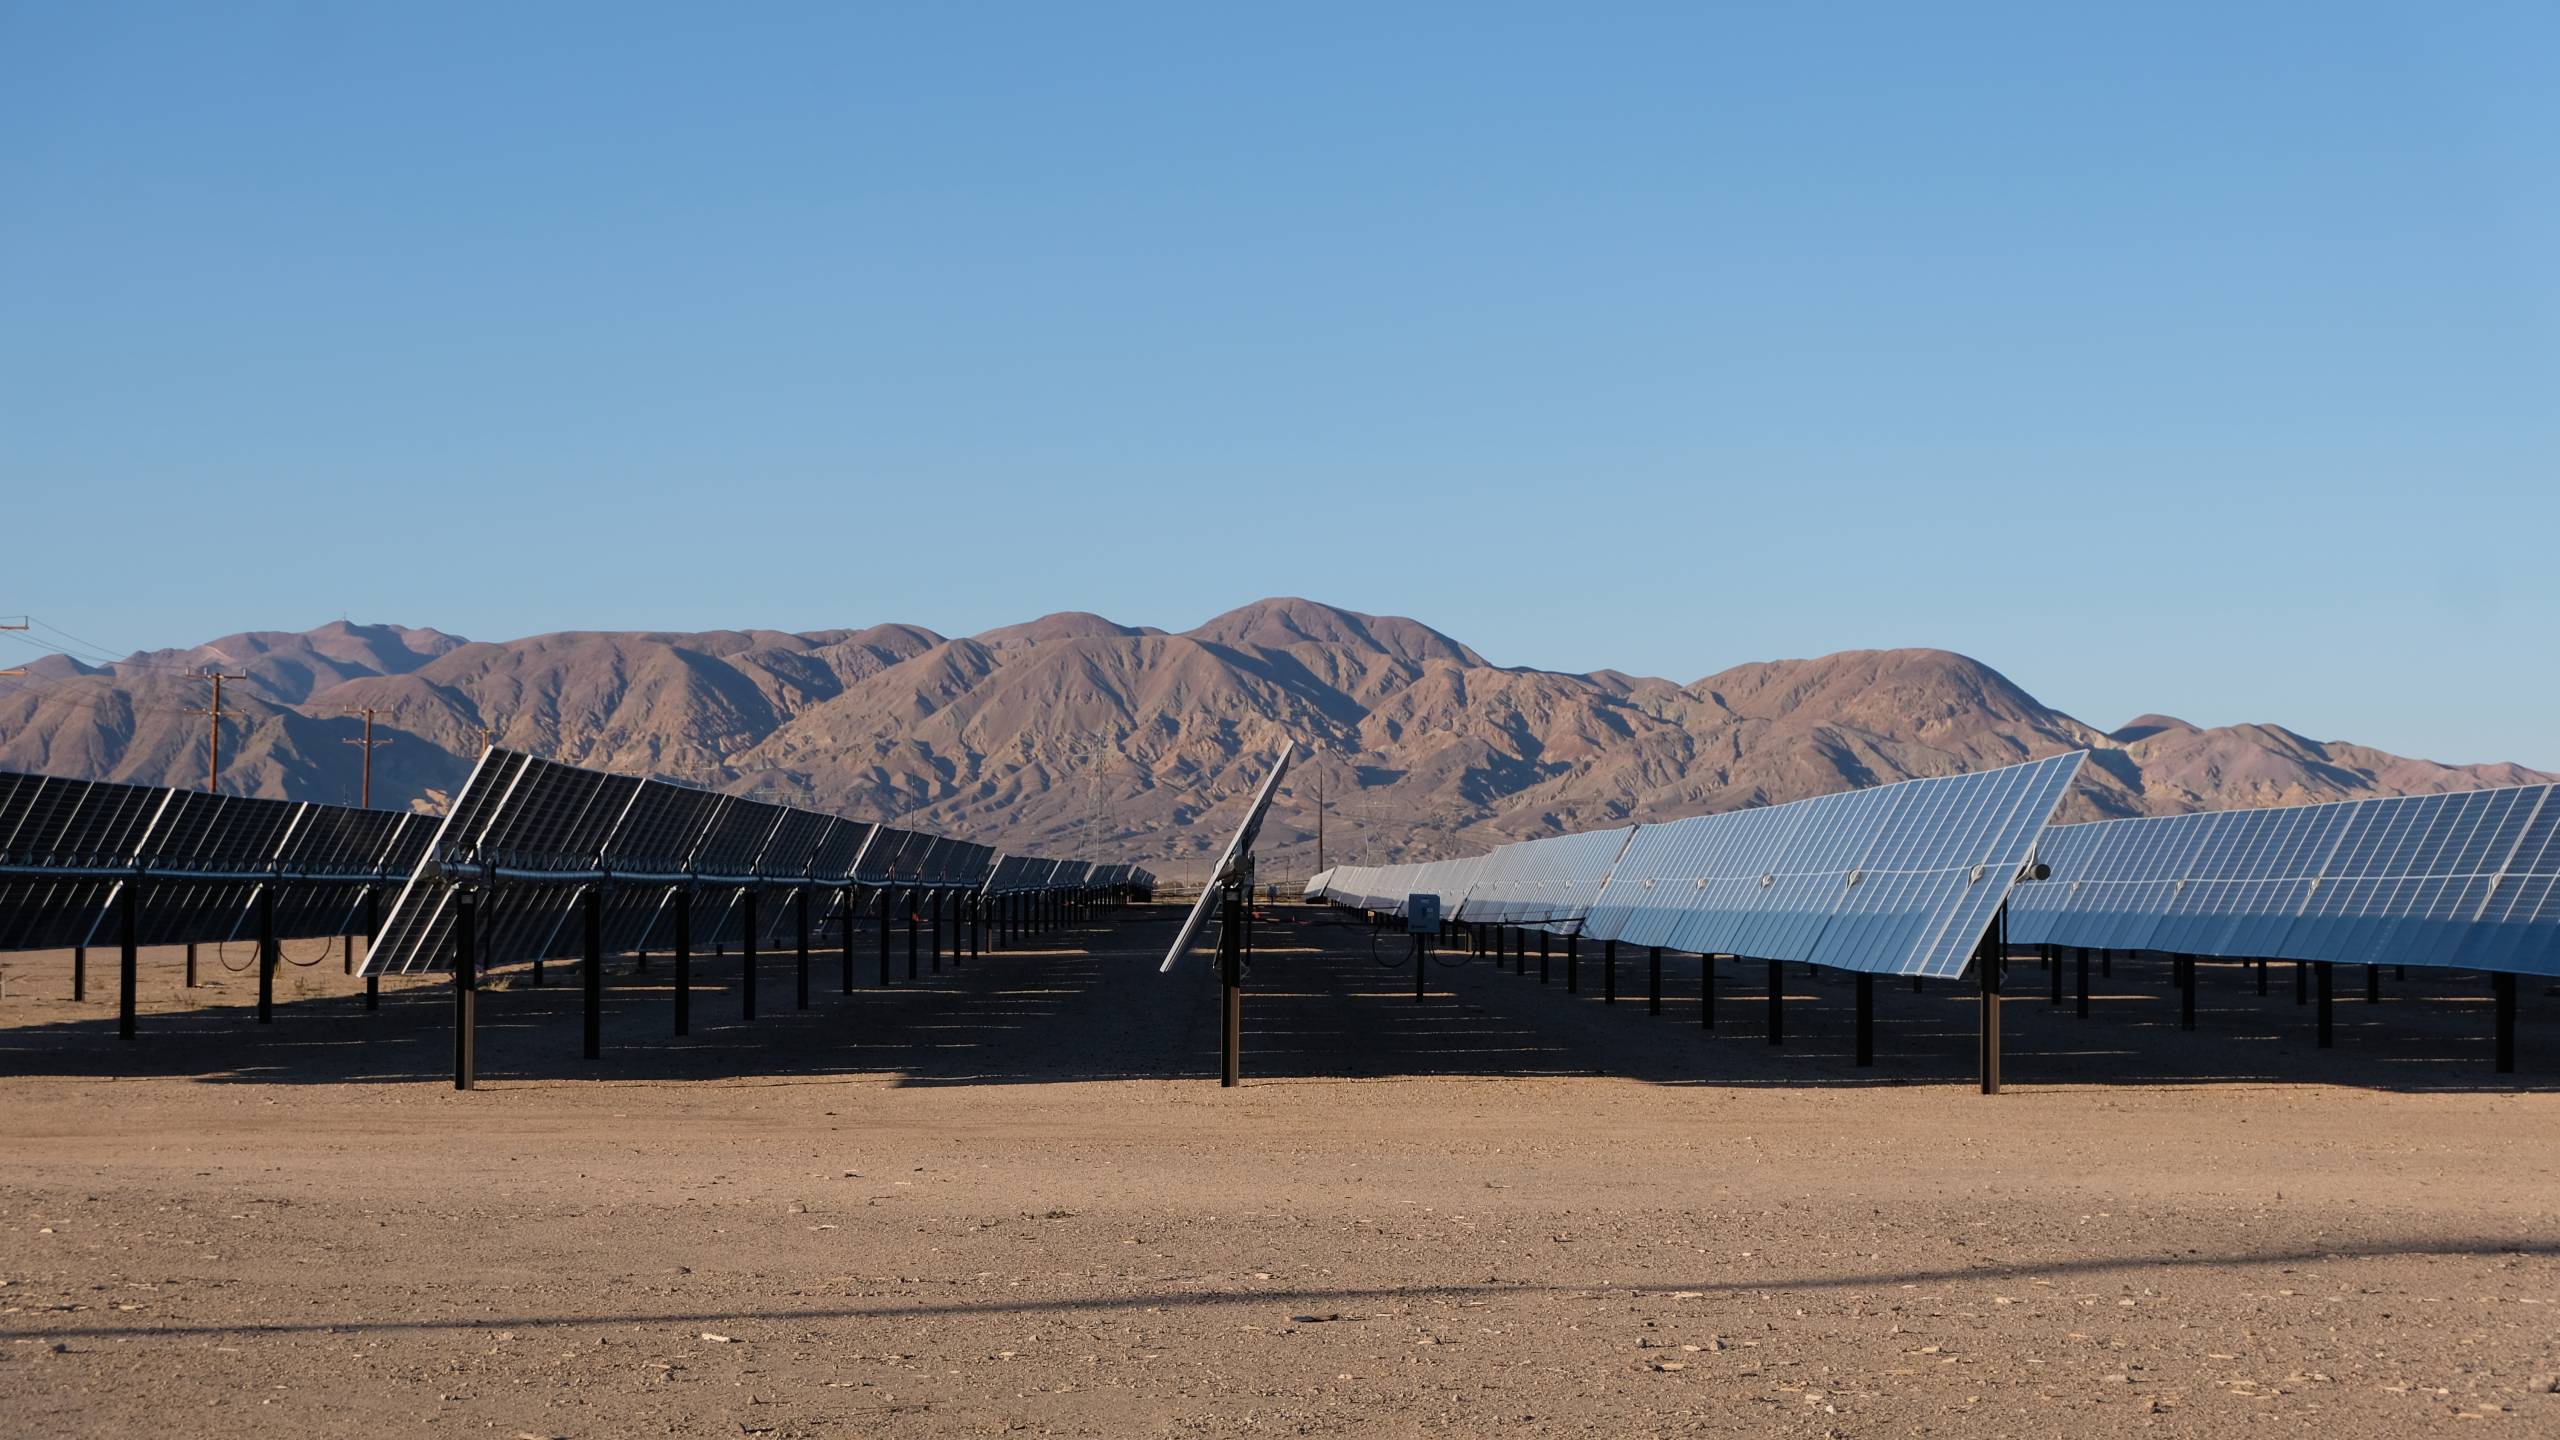 solar panels are seen in the desert in front of a mountain range